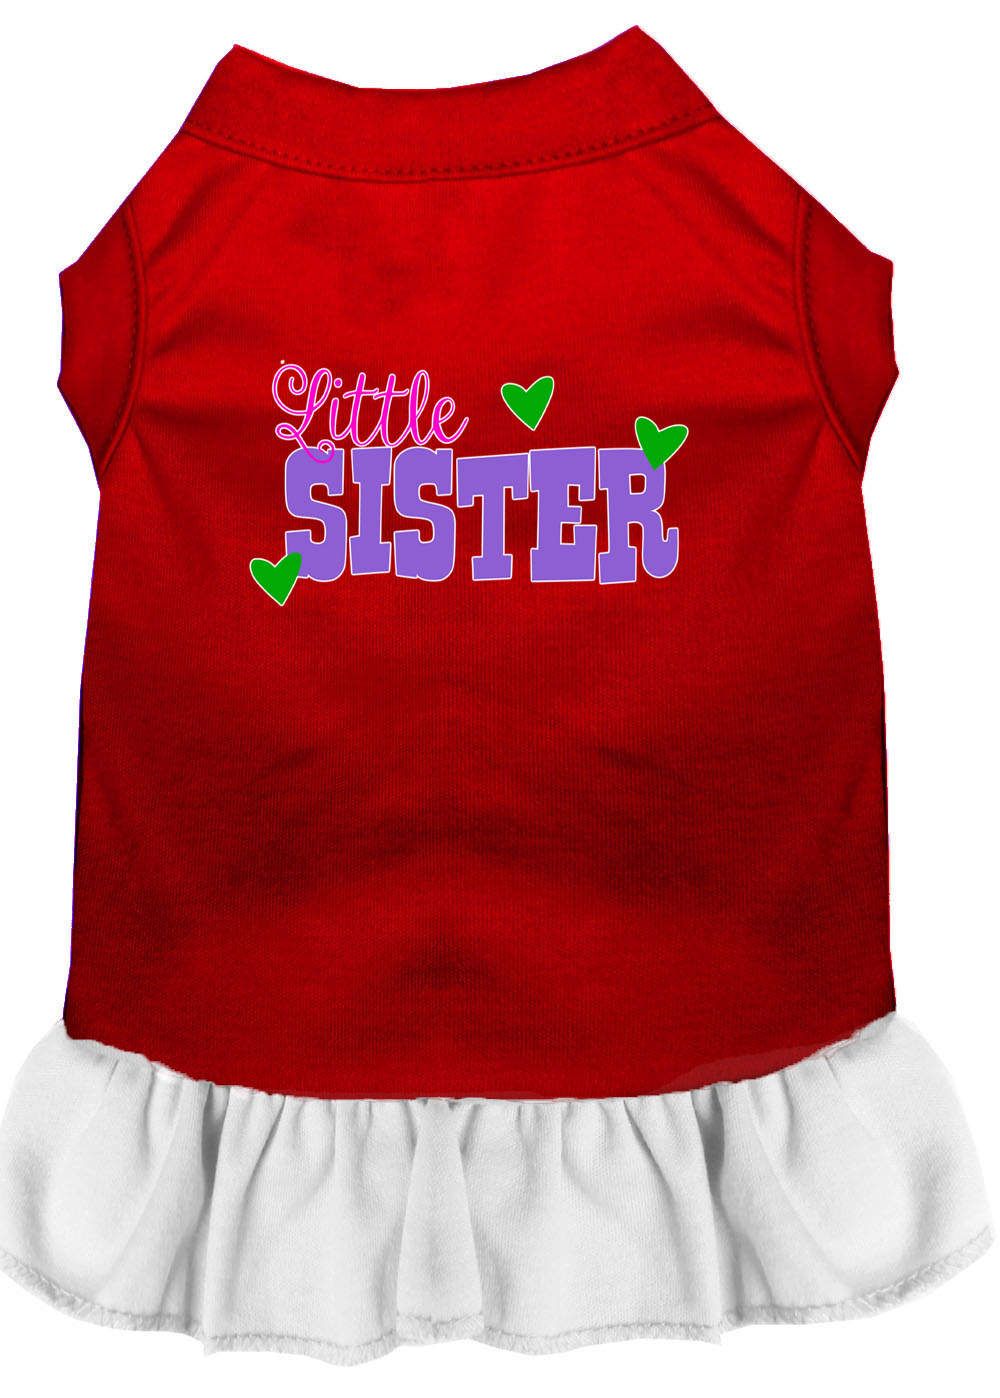 Little Sister Screen Print Dog Dress Red with White Med